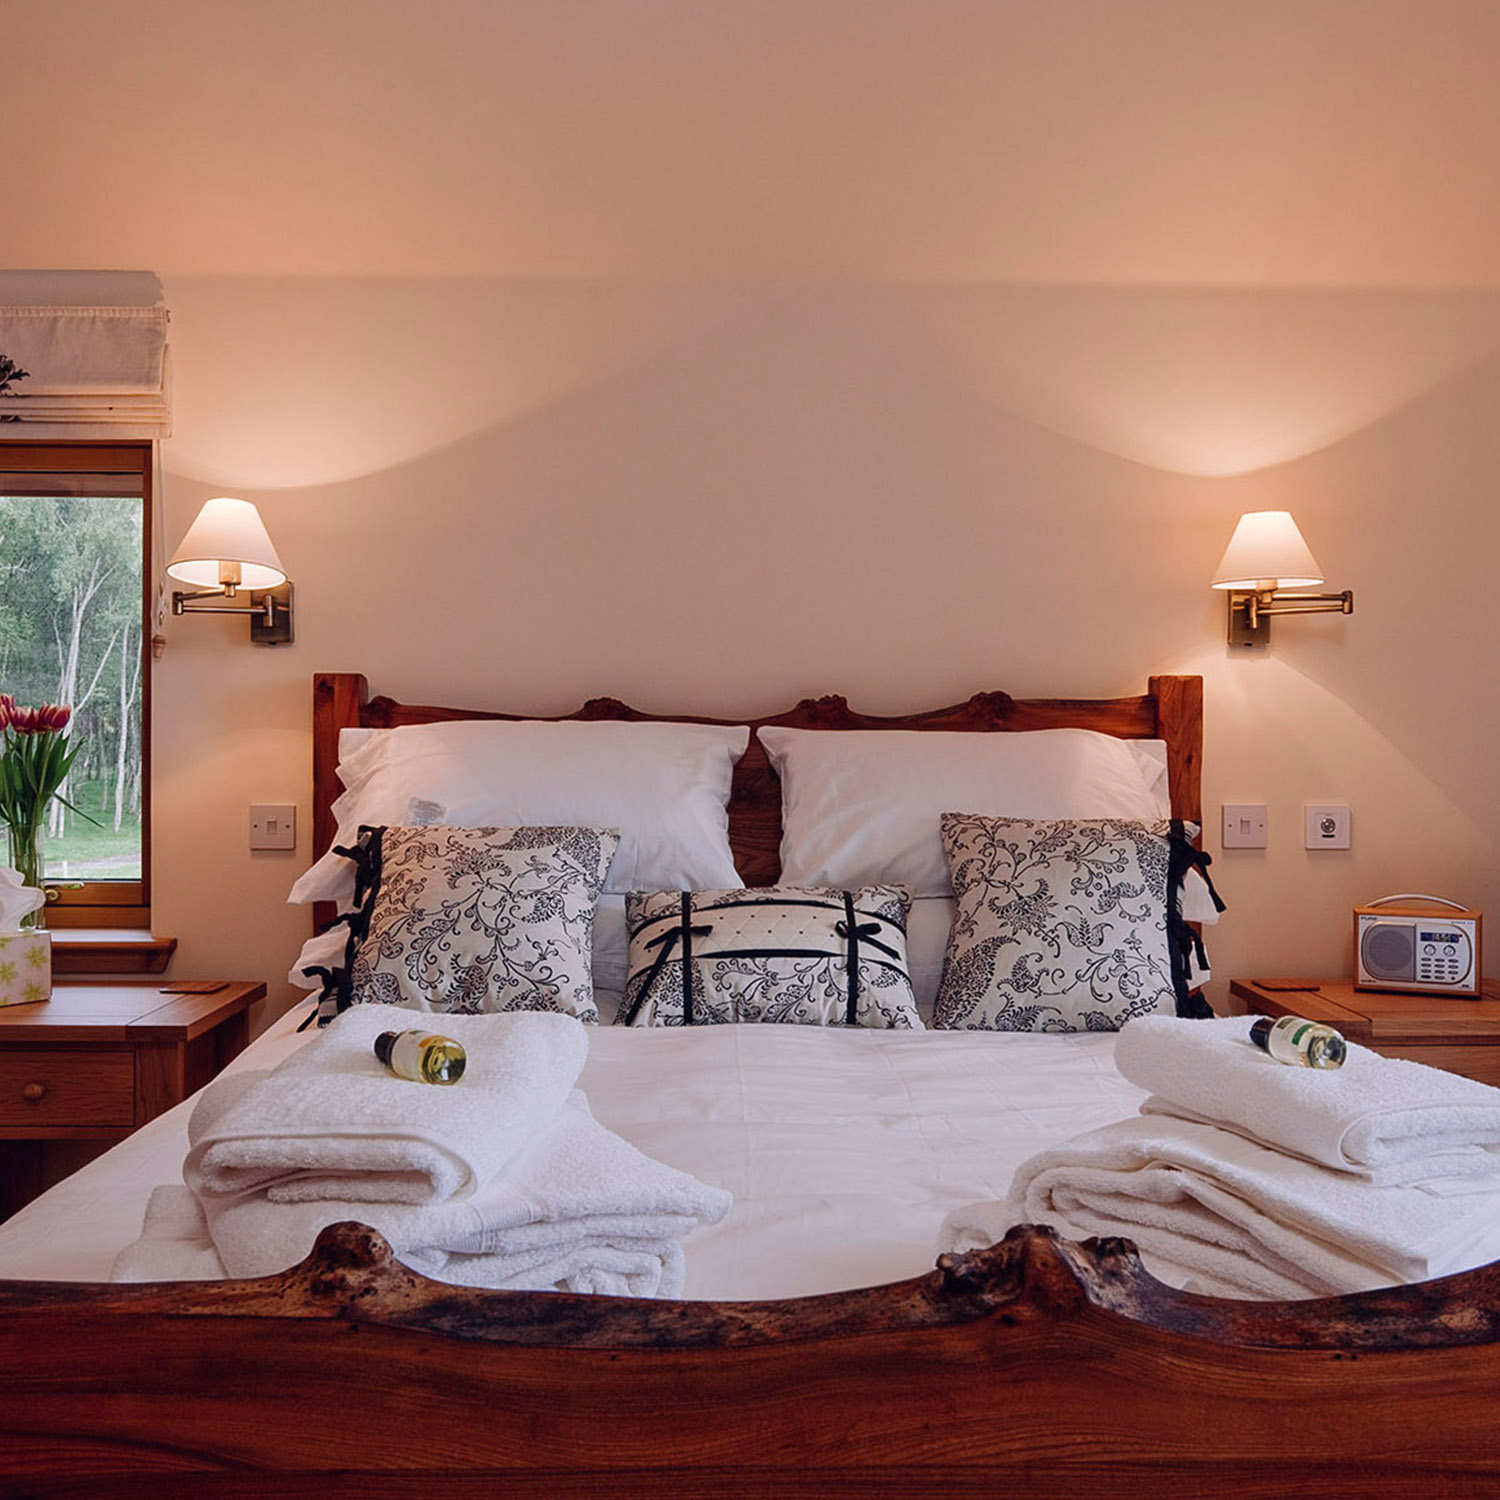 Luxury king-sized bedroom, 5 star Lodge near Inverness